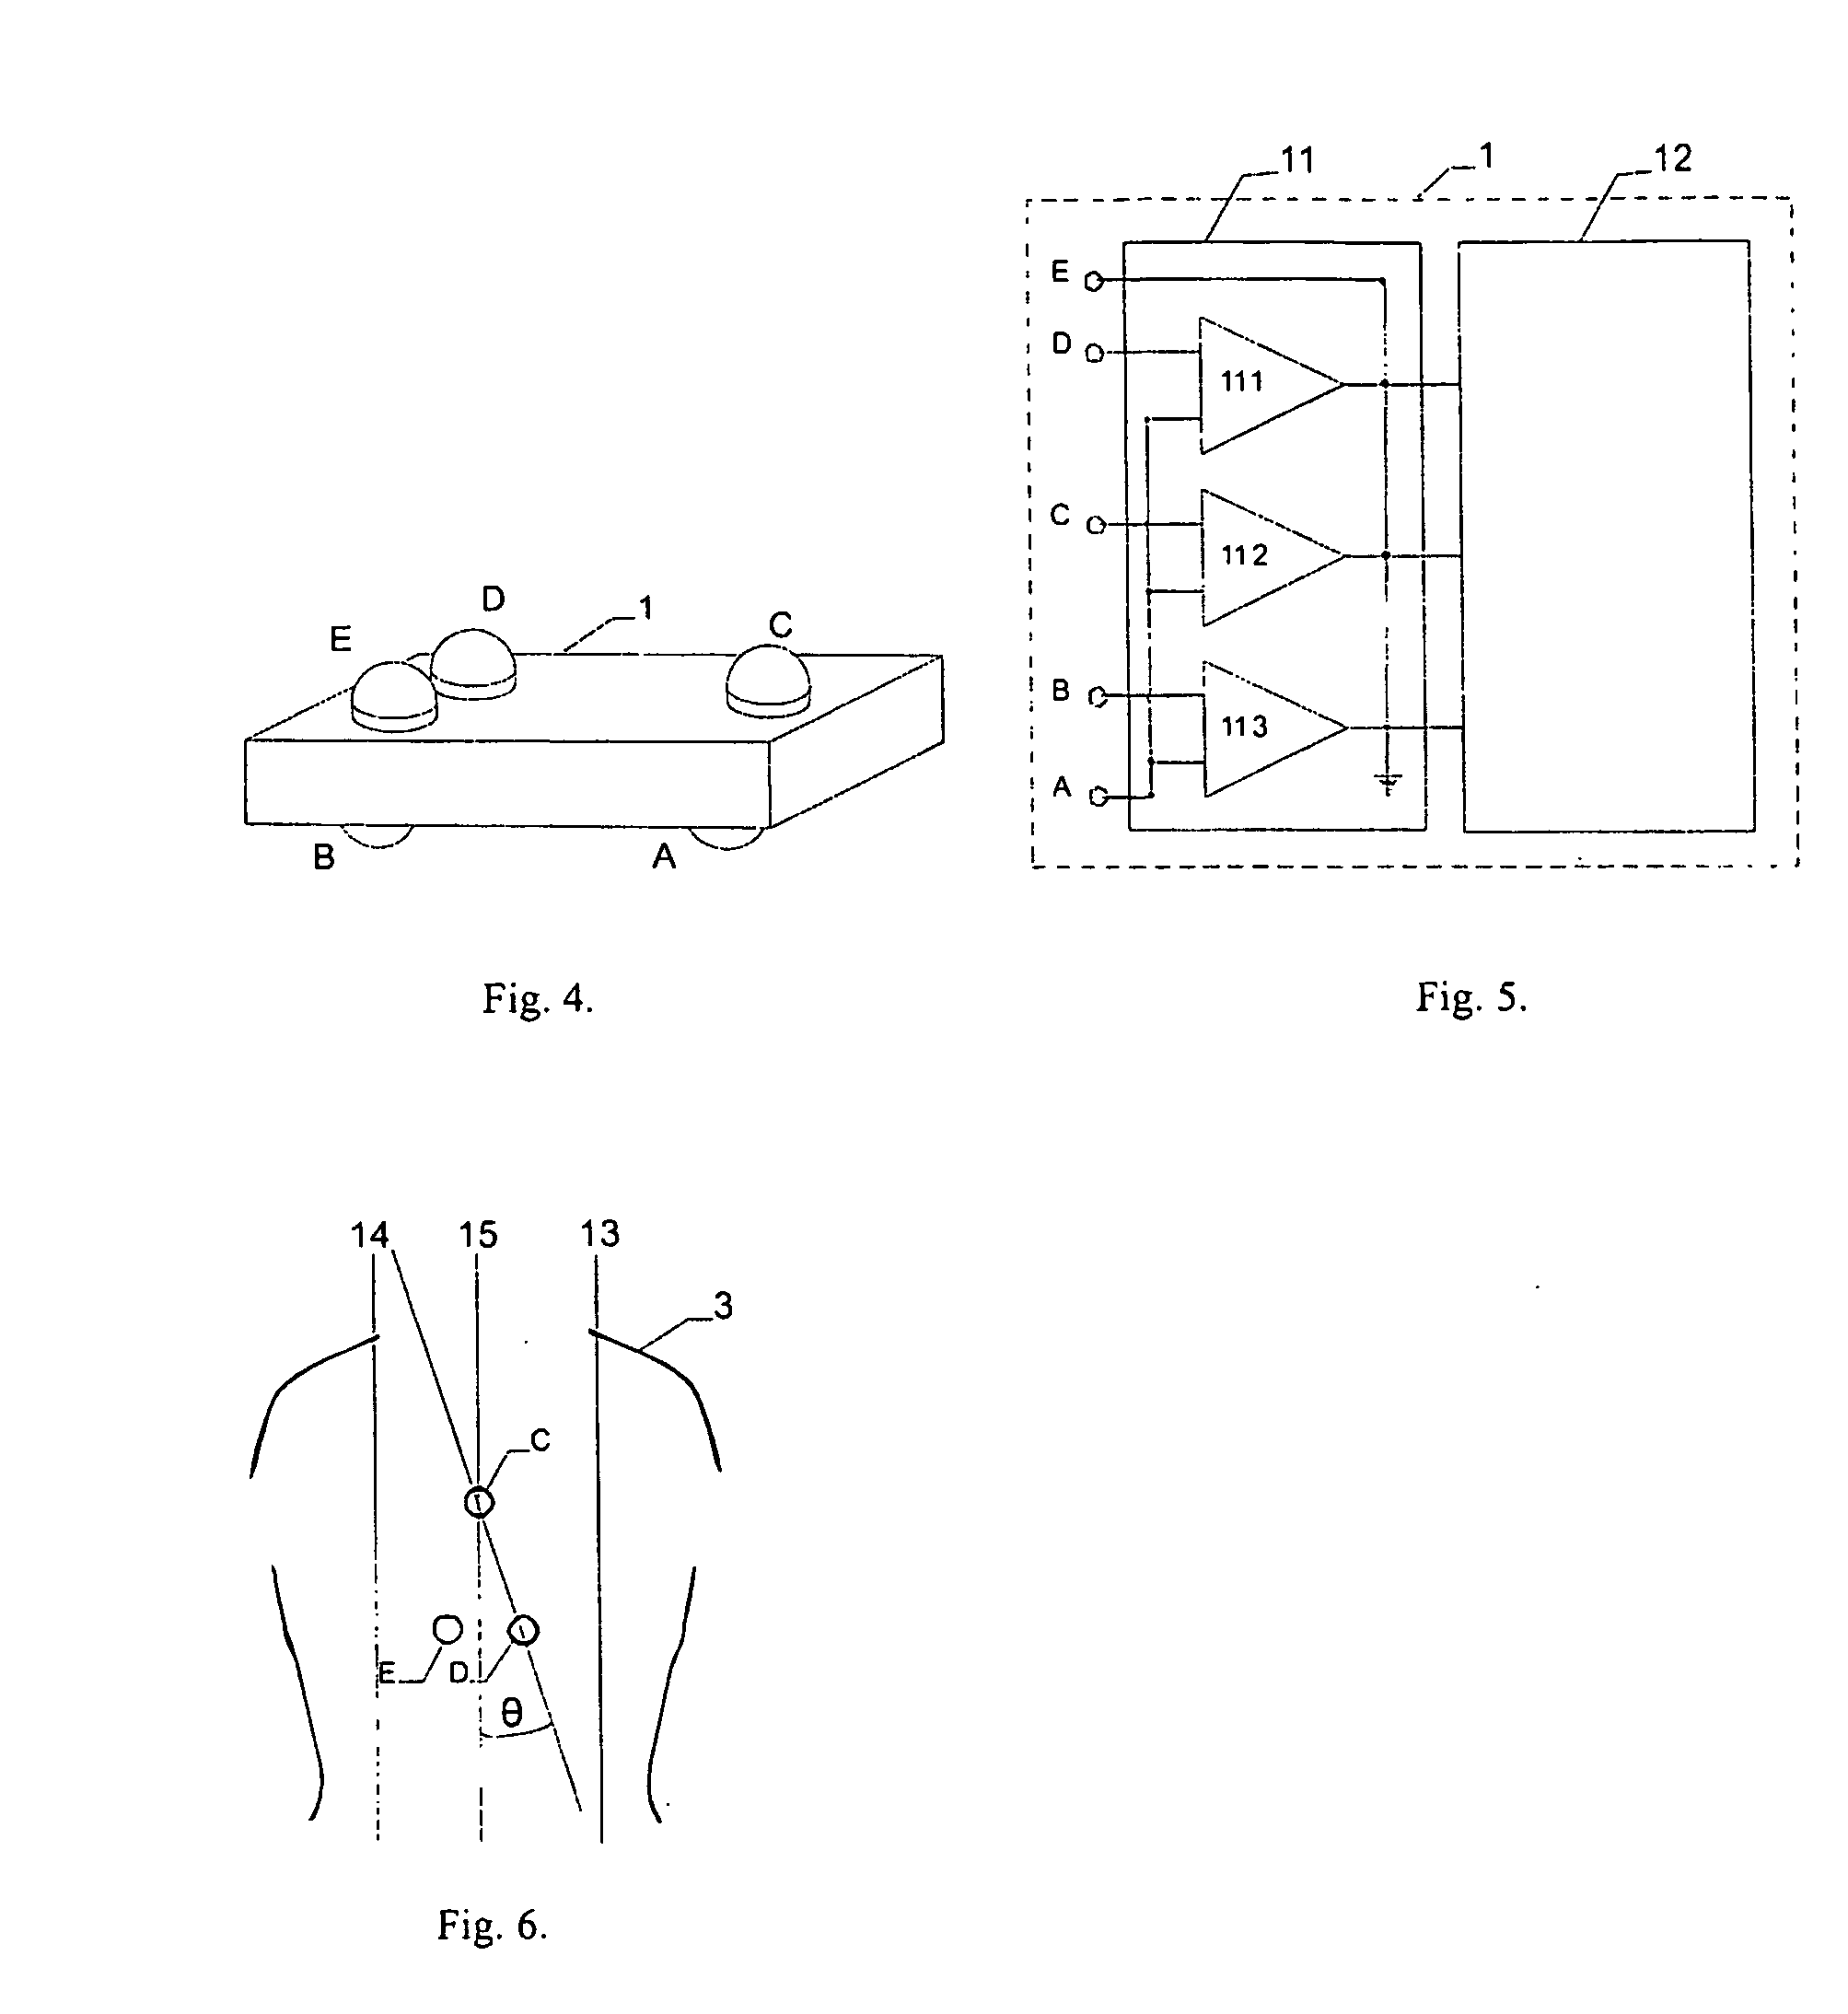 Apparatus and method for cordless recording and telecommunication transmission of three special ecg leads and their processing